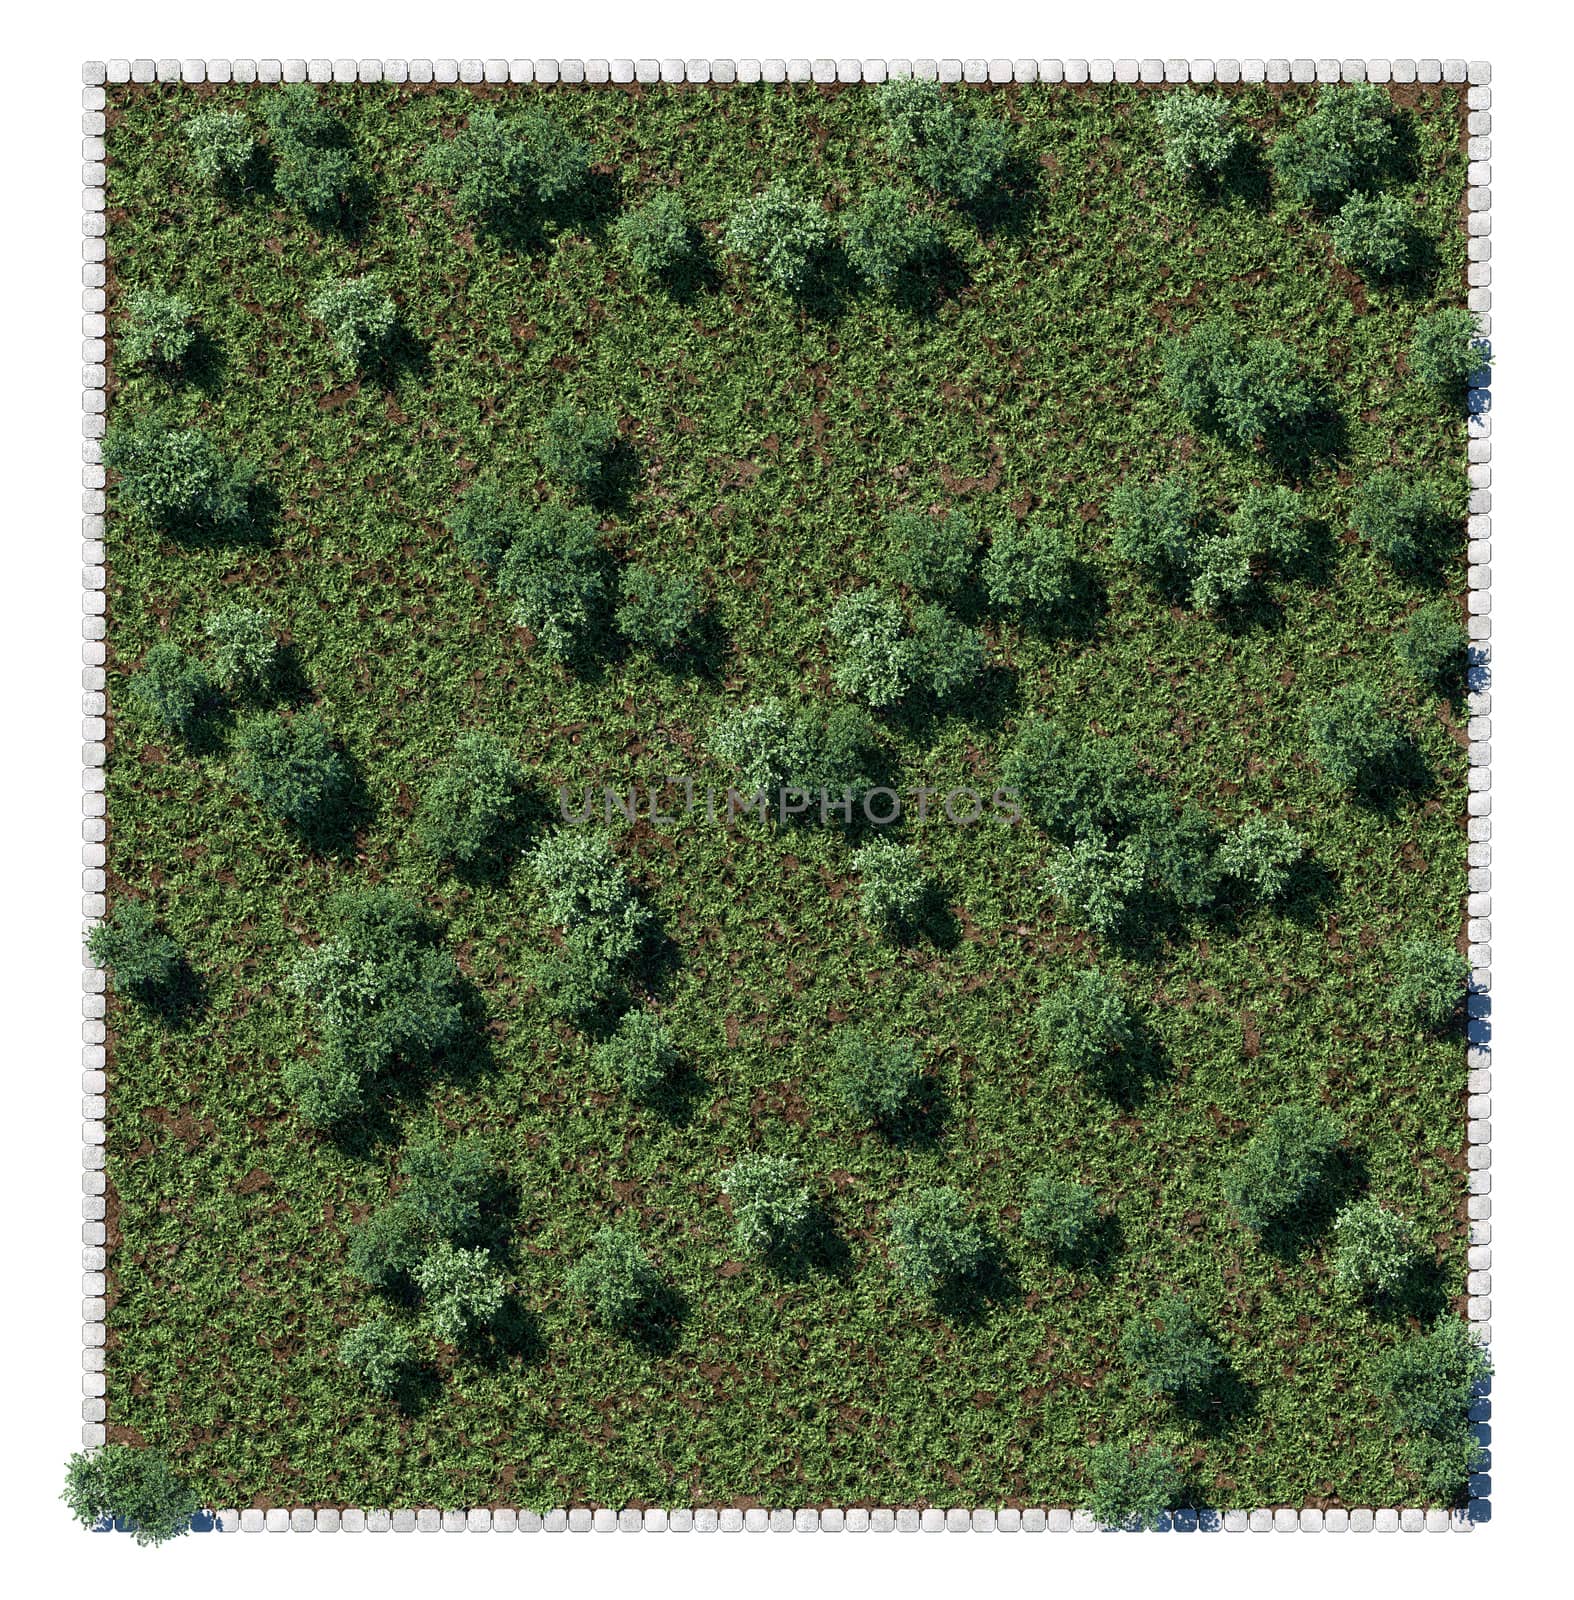 Park trees and glade view from above. Square composition isolated